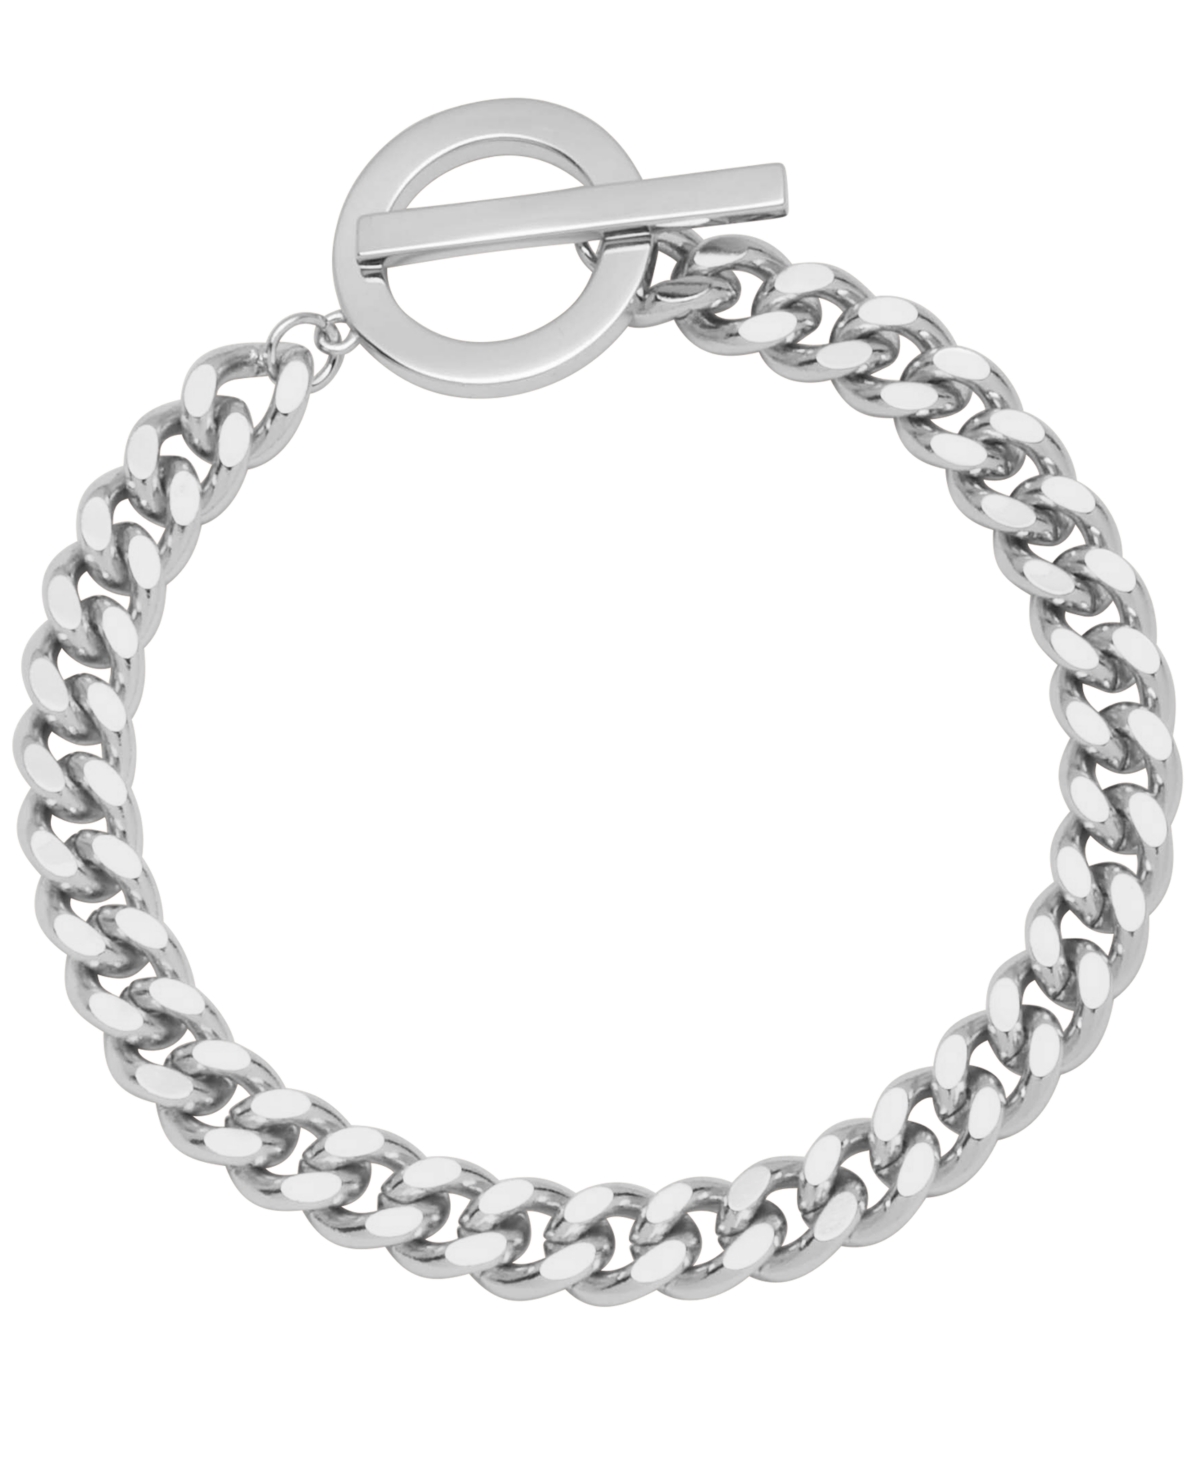 Women's Curb Chain Bracelet - Gold Plated